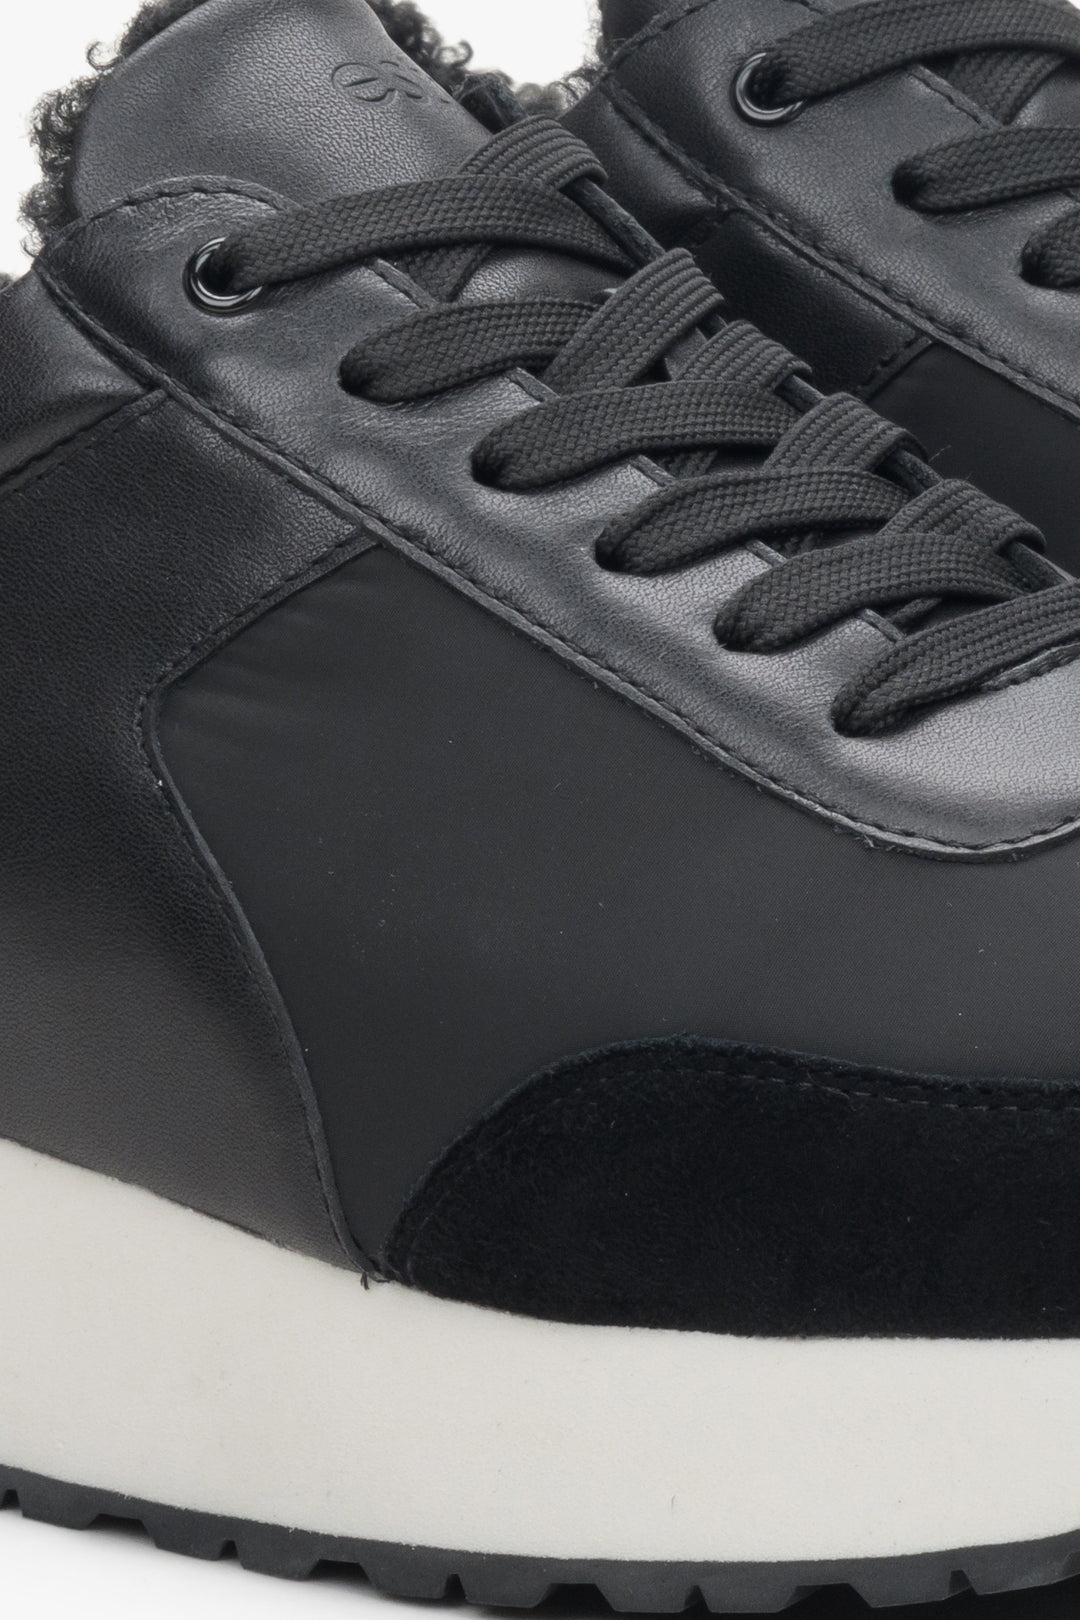 Women's winter sneakers with insulation in black made of leather and velvet - close-up on the details.